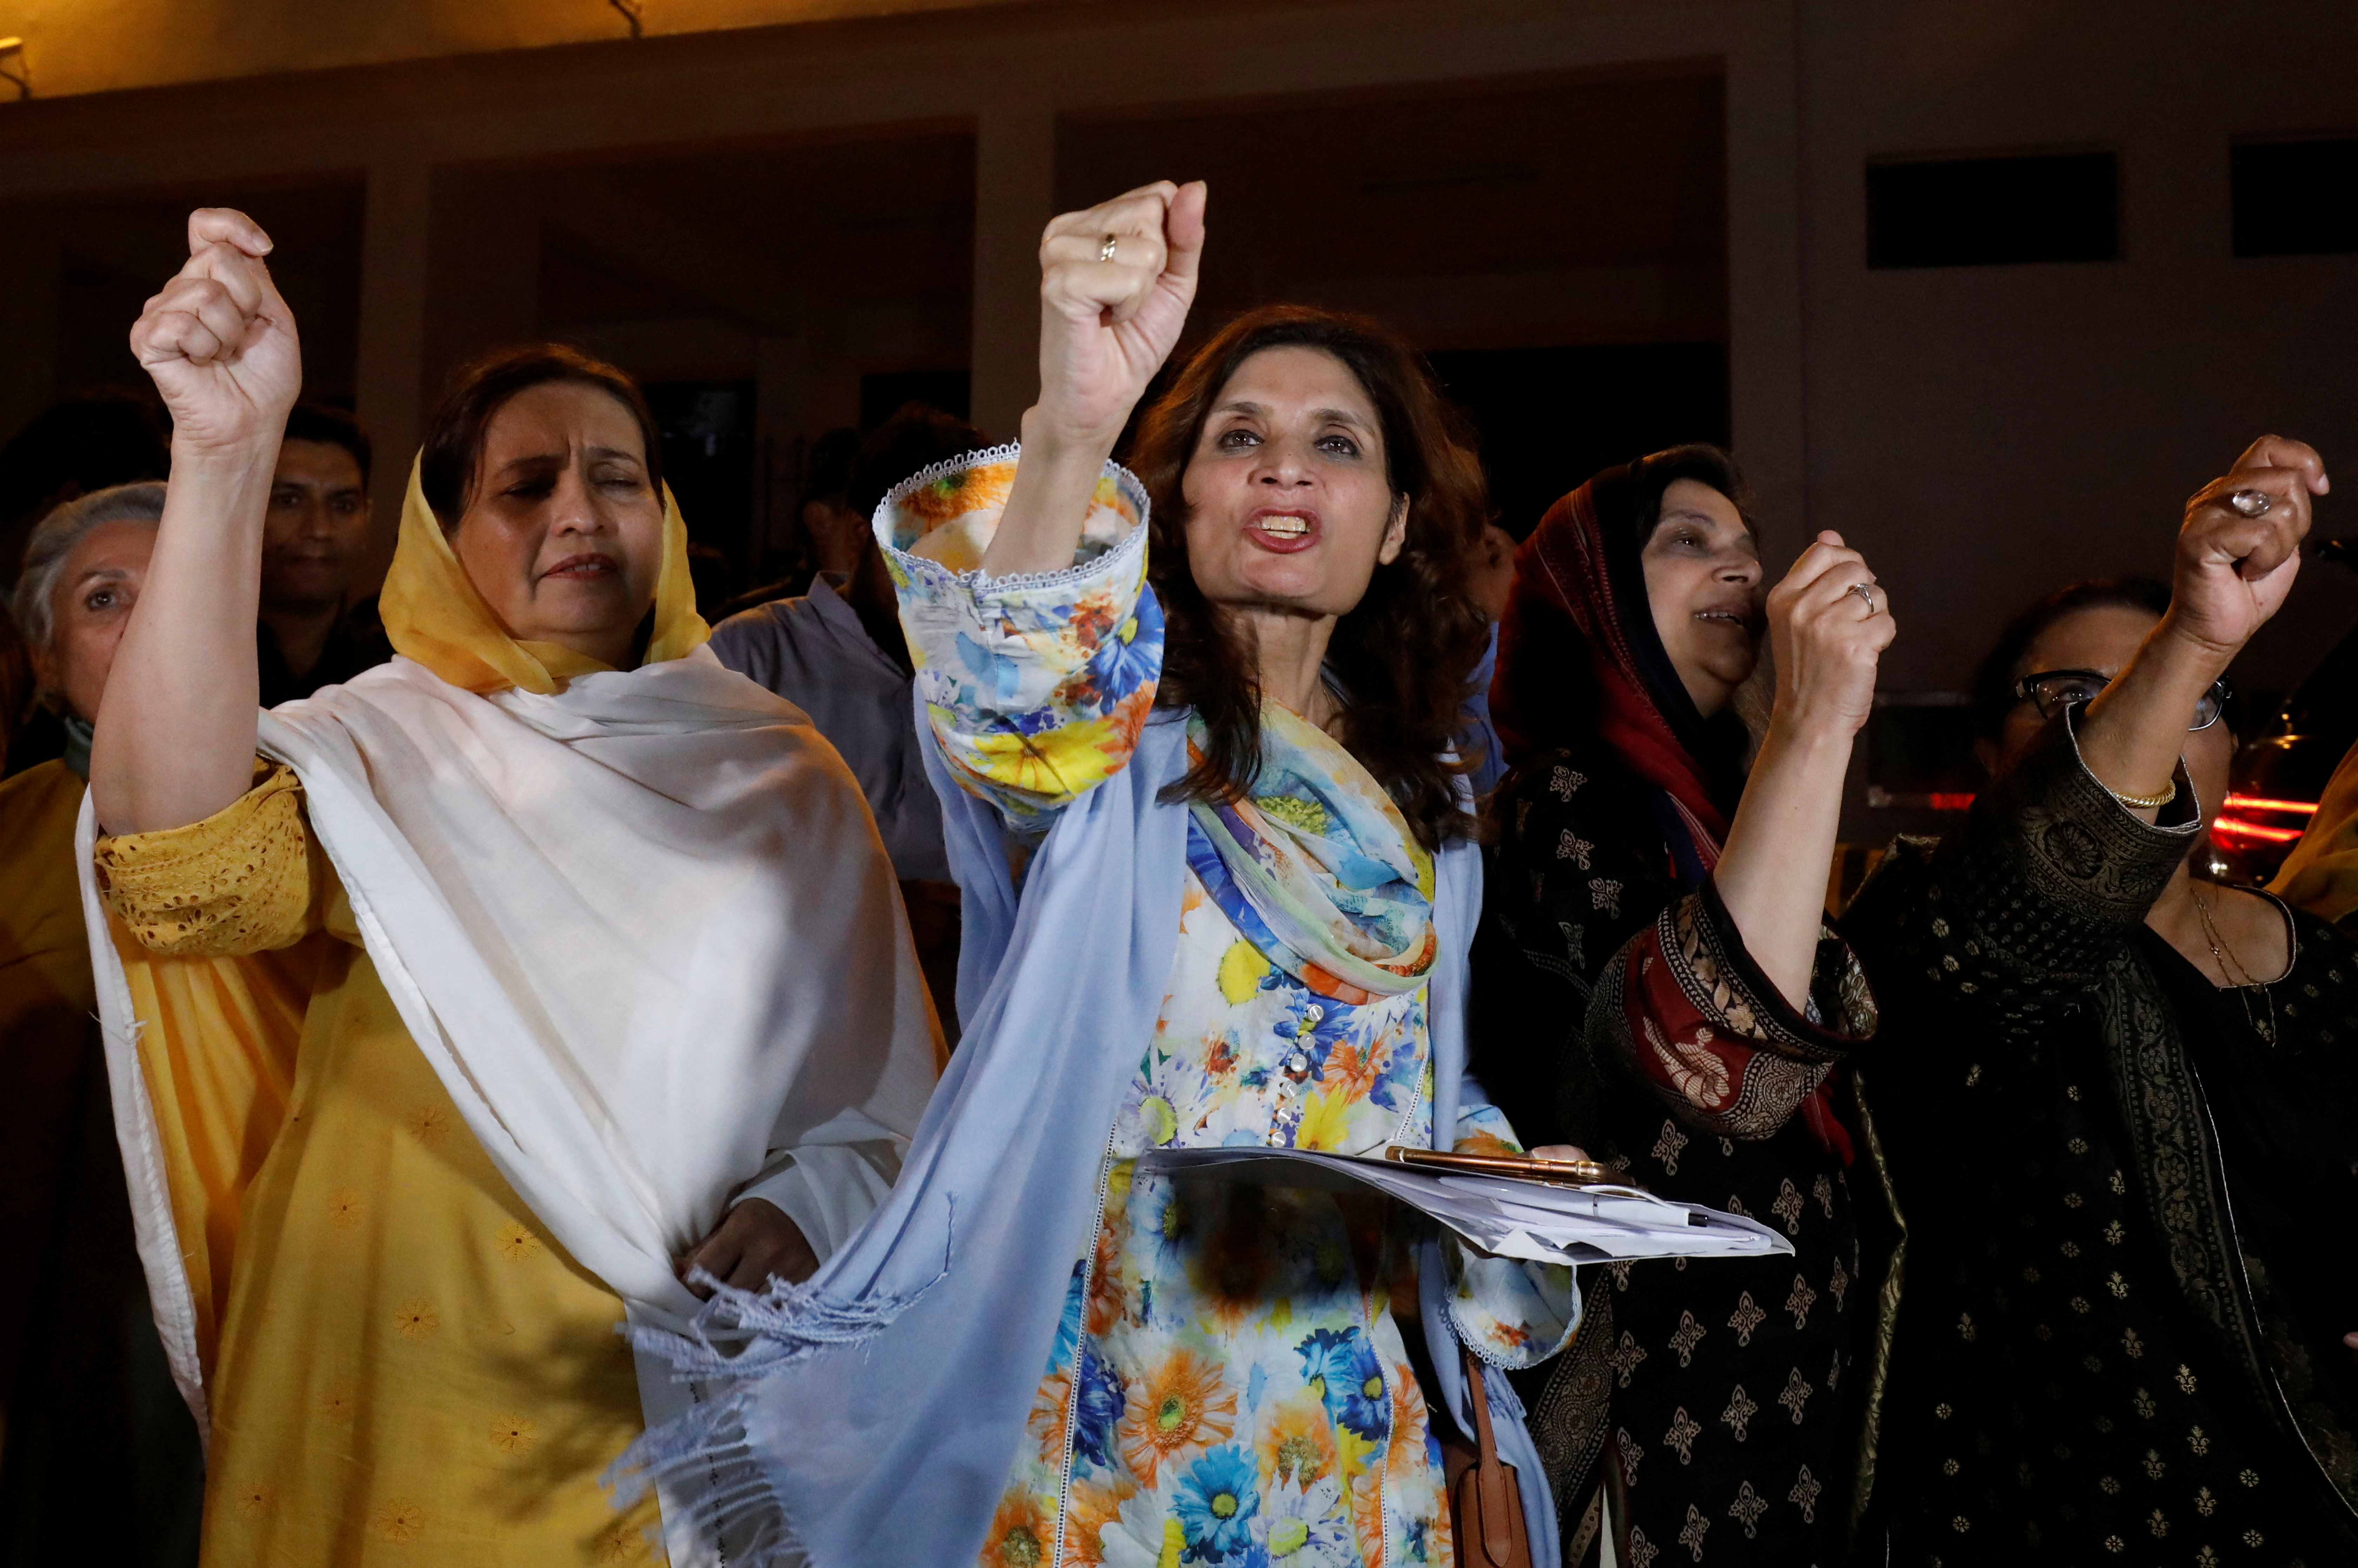 Supporters of former Pakistani Prime Minister Imran Khan chant slogans as they protest after he lost a confidence vote in the lower house of parliament, in Islamabad